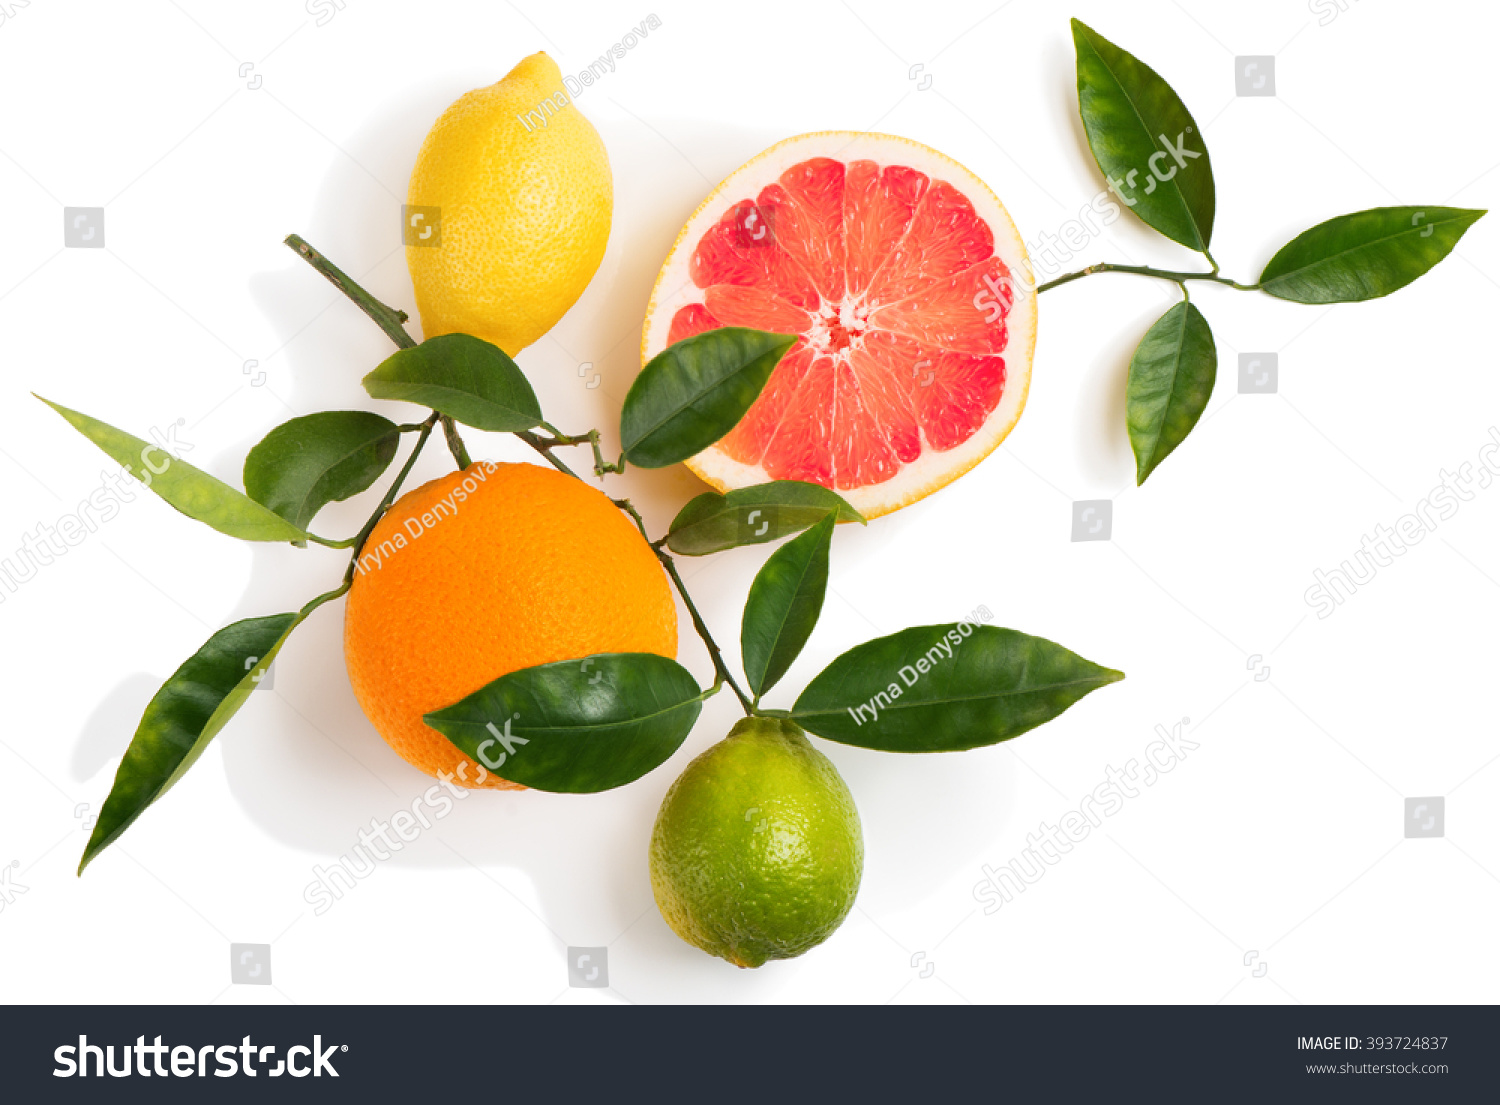 Top view of citrus fruits (grapefruit, orange, lemon, lime) on a branch with green leaves isolated on white background. #393724837